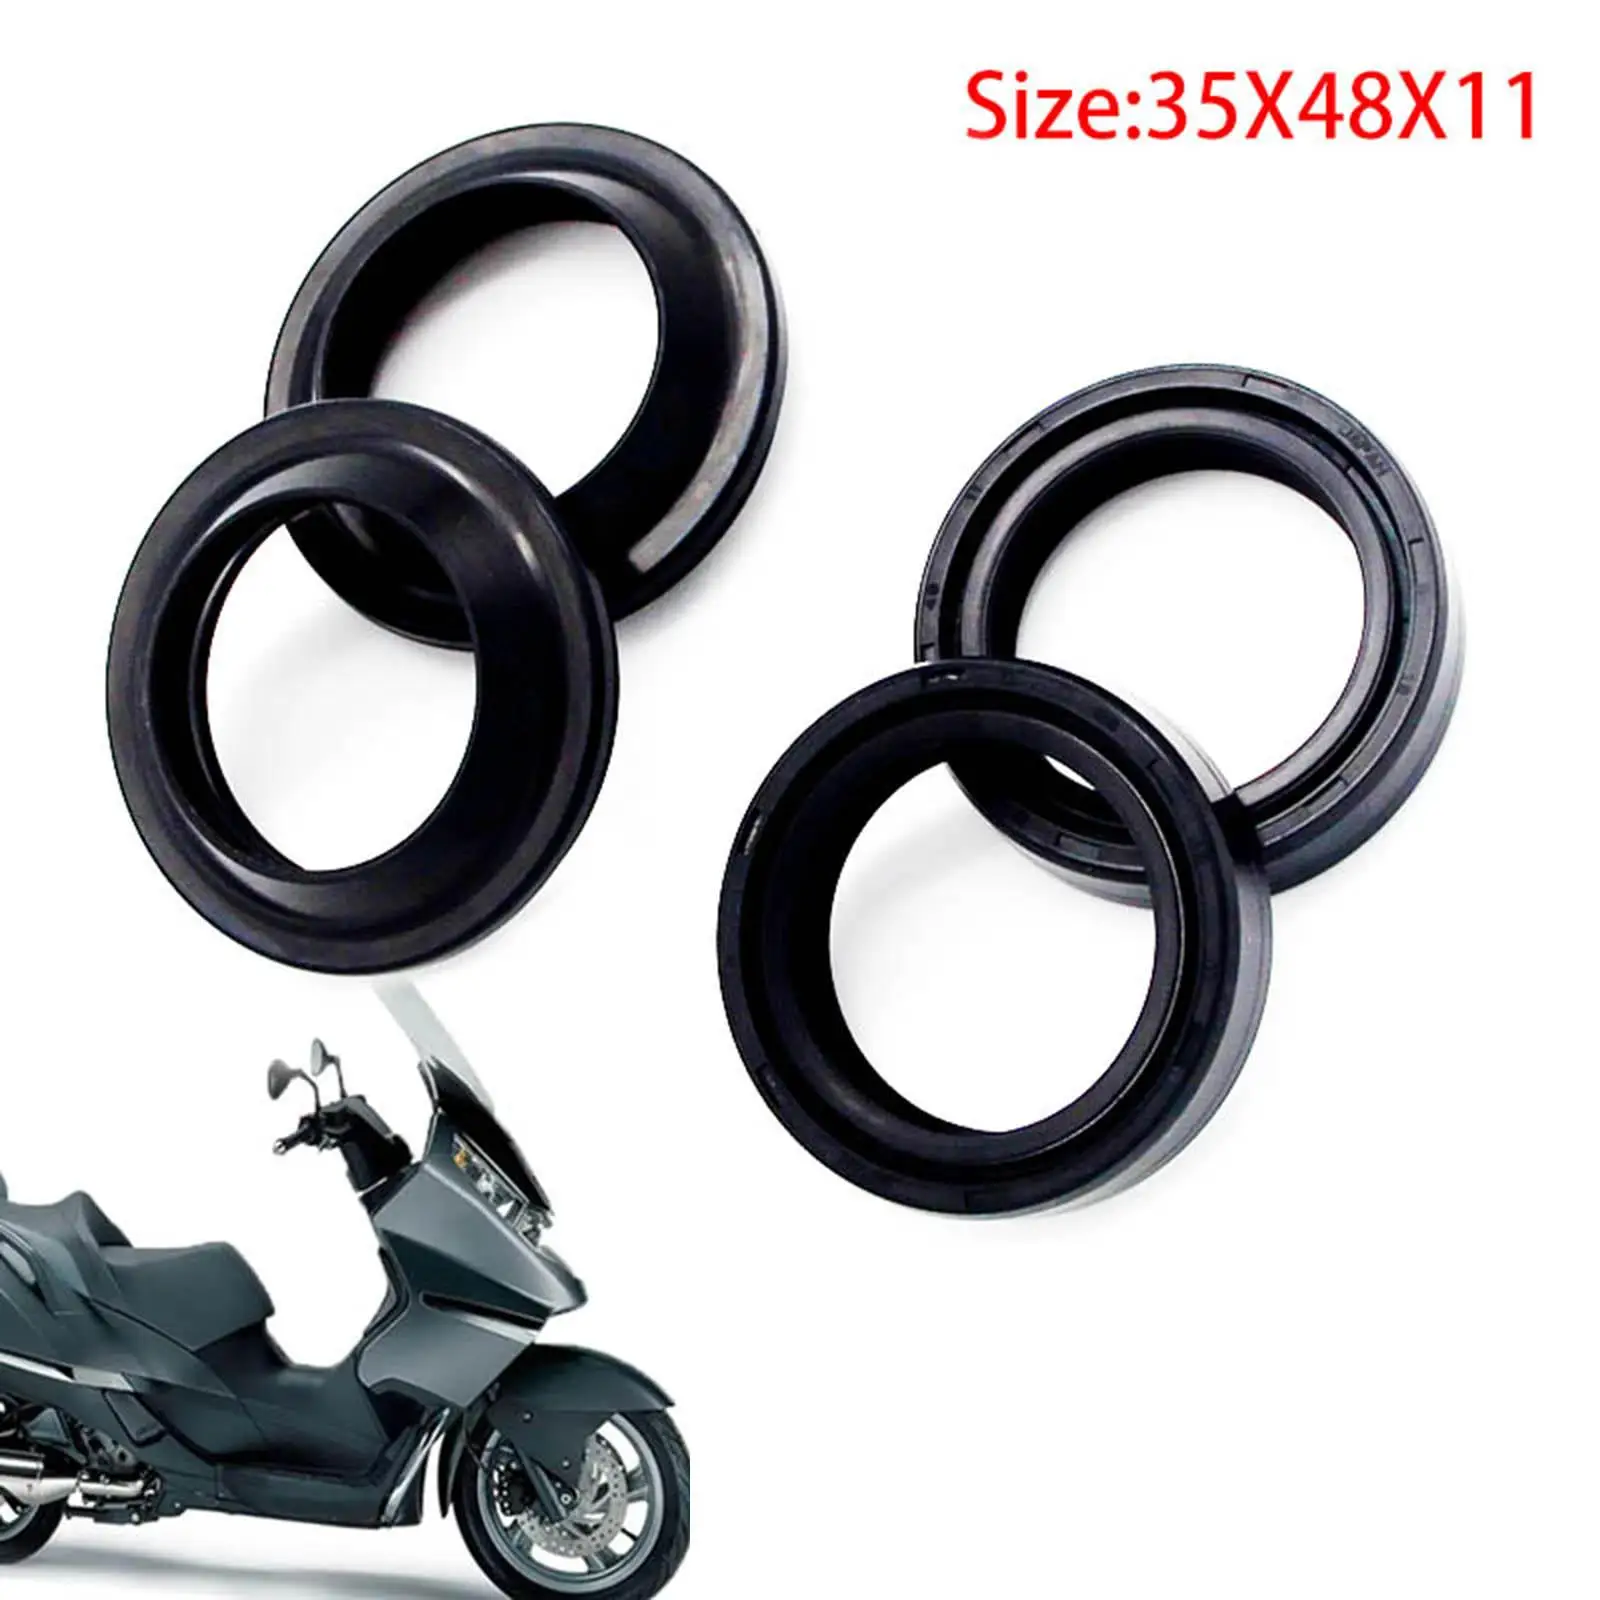 Motorcycle Front Fork Oil Seal and Dust Seal Kit 35x48x11mm Good Performance Replacements for Honda CB650C Custom 1980-1981